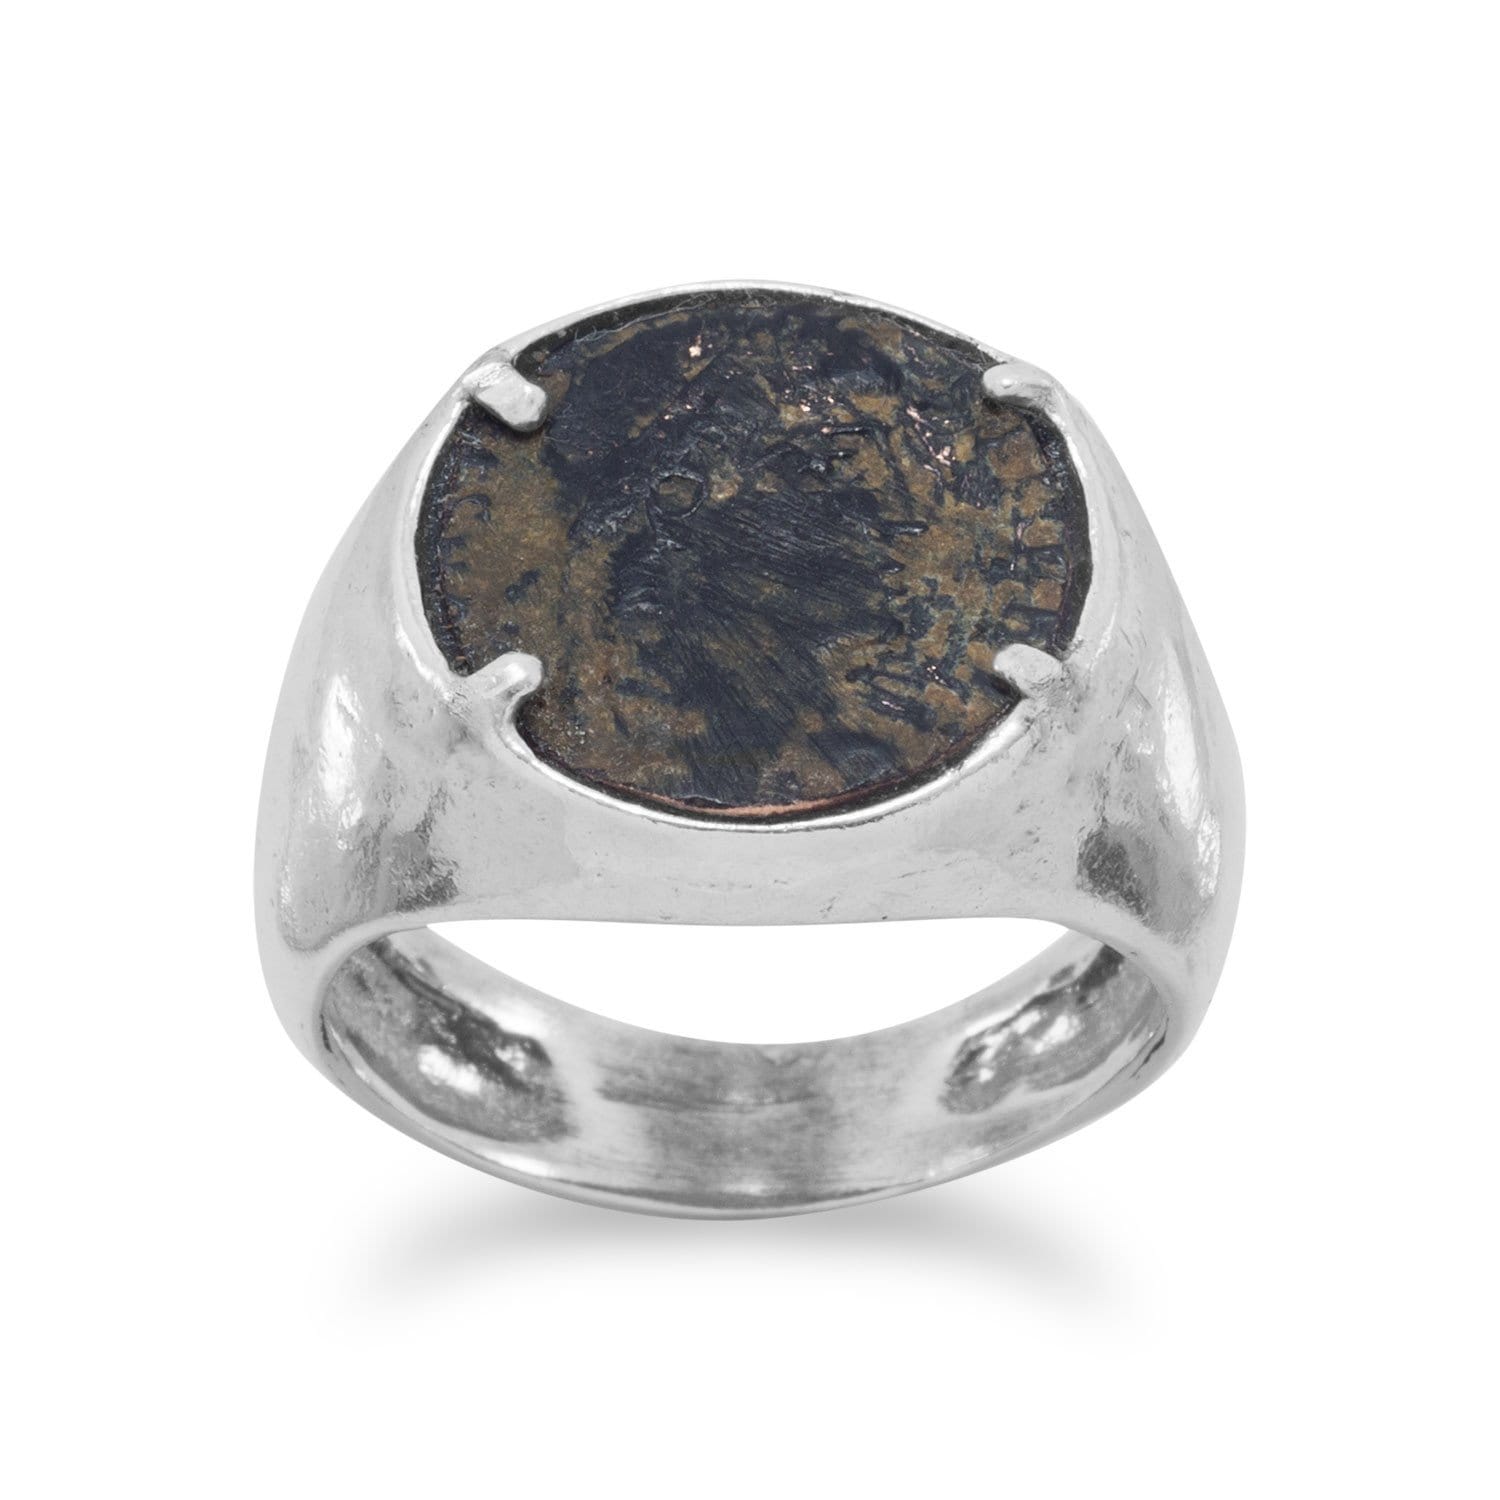 Buy 22k Roman Coin Replica Ring at Nancy Troske Jewelry for only $1,600.00